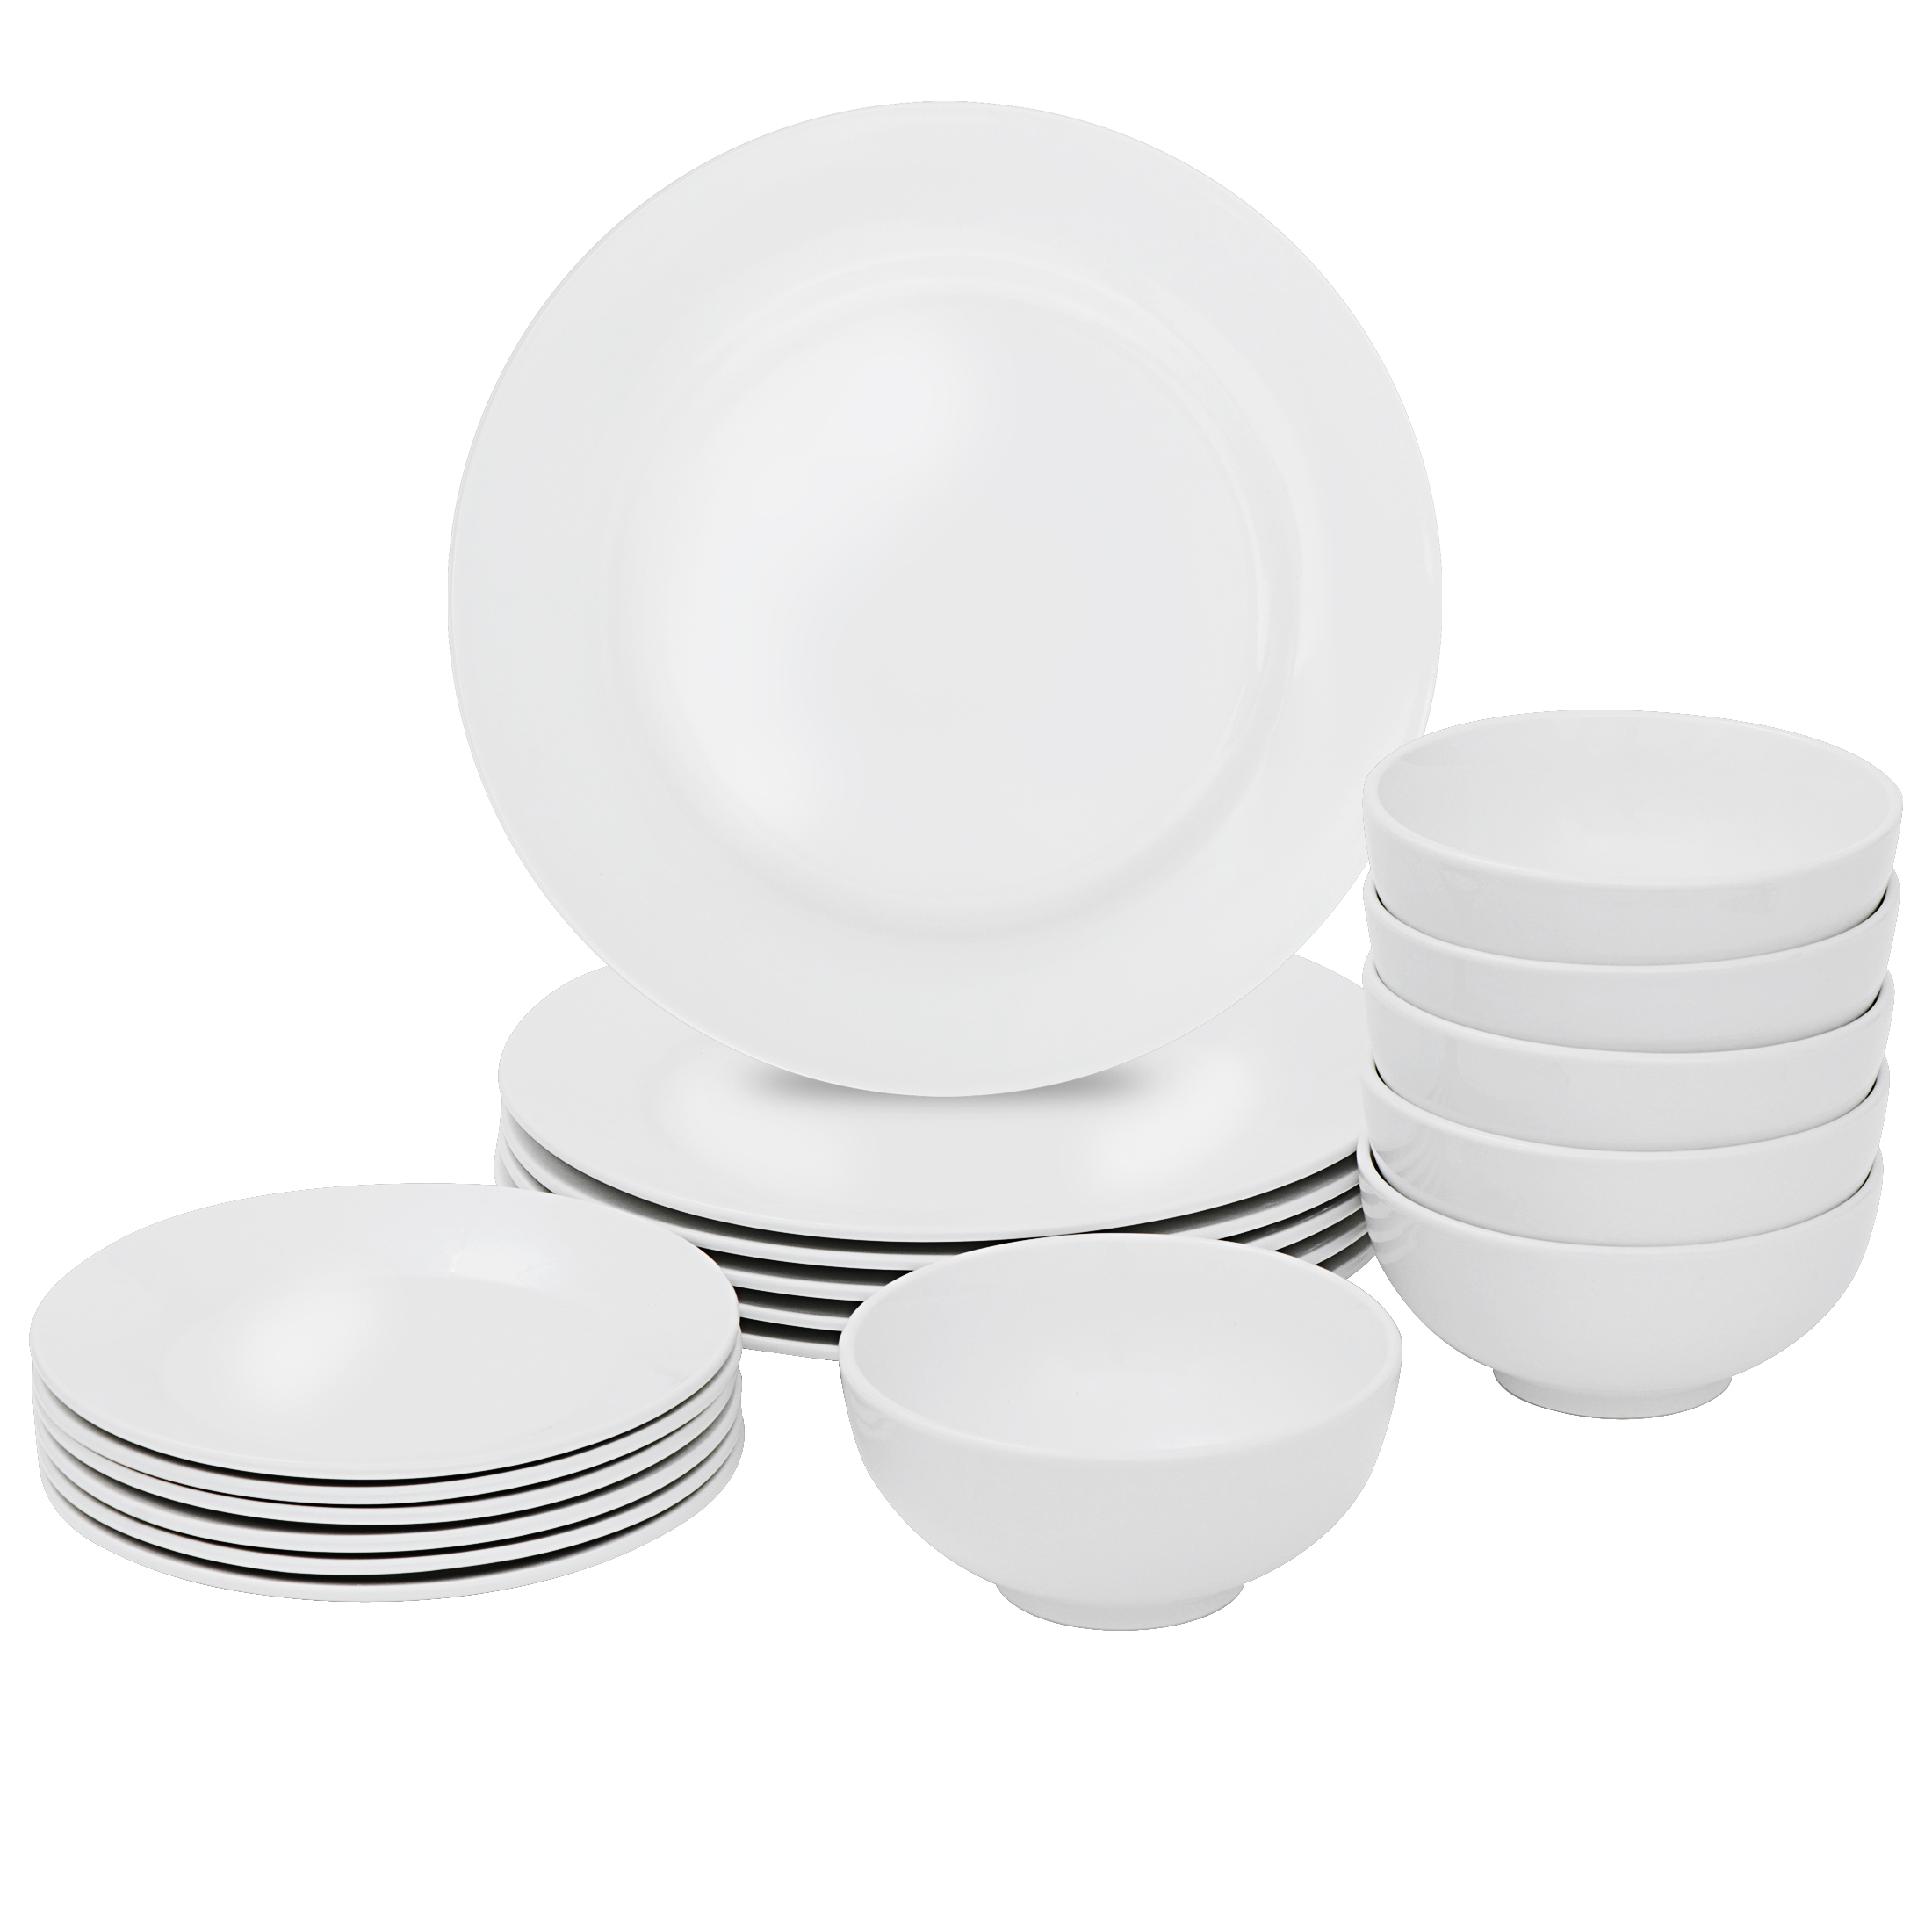 18 Pieces Dinner Plates & Bowls Set Home Kitchen Dinnerware Service for ...